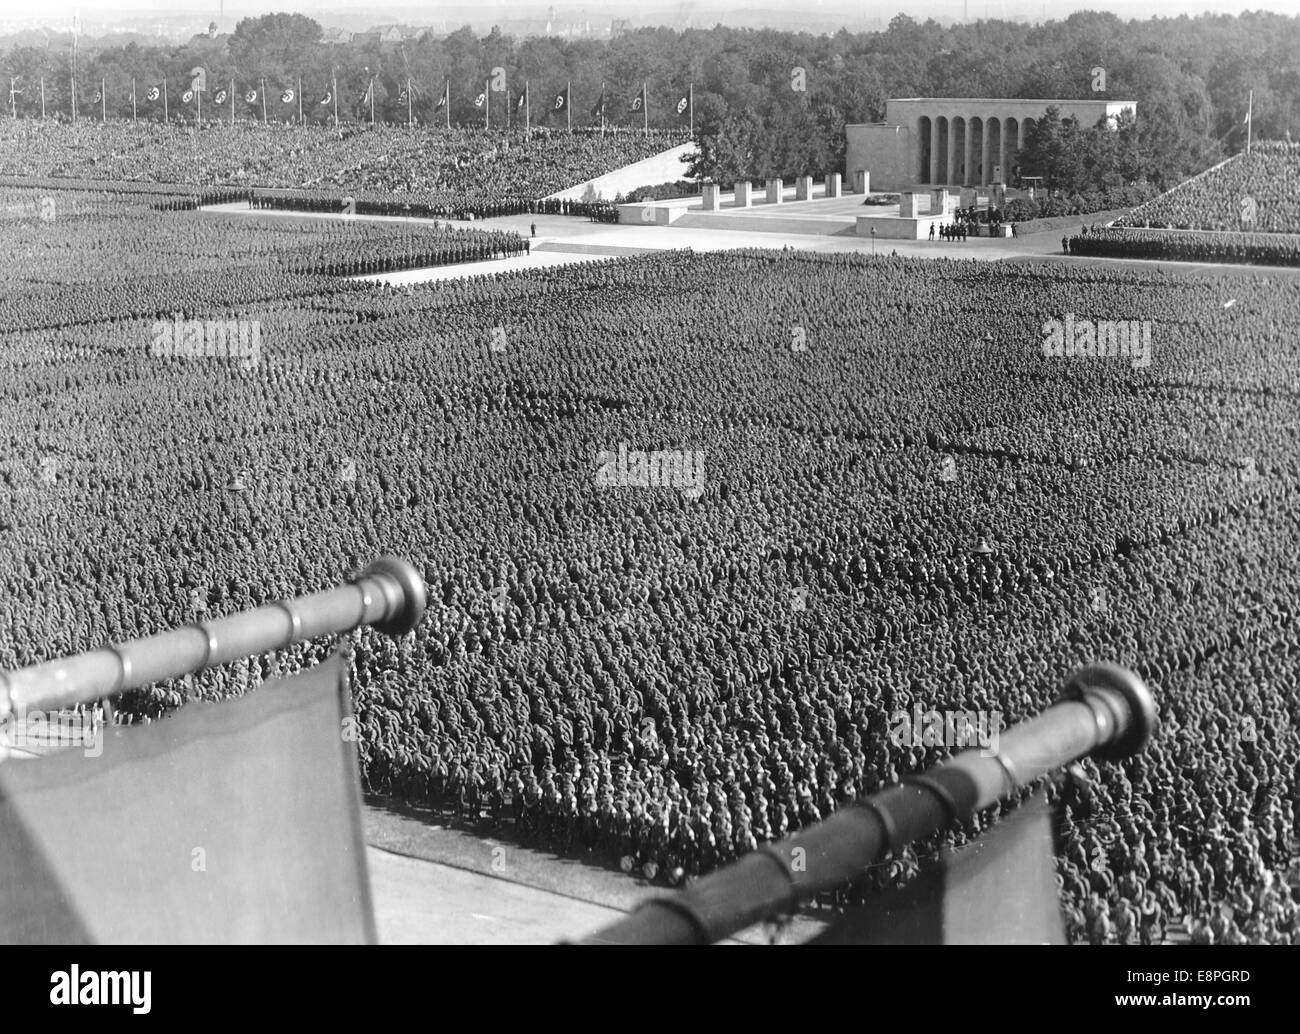 Nuremberg Rally 1937 in Nuremberg, Germany - Nazi party rally grounds - Sturmabteilung (SA) and Schutstaffel (SS) have taken up position at Luitpoldarena. The Hall of Honour can be seen in the background. (Flaws in quality due to the historic picture copy) Fotoarchiv für Zeitgeschichtee - NO WIRE SERVICE - Stock Photo